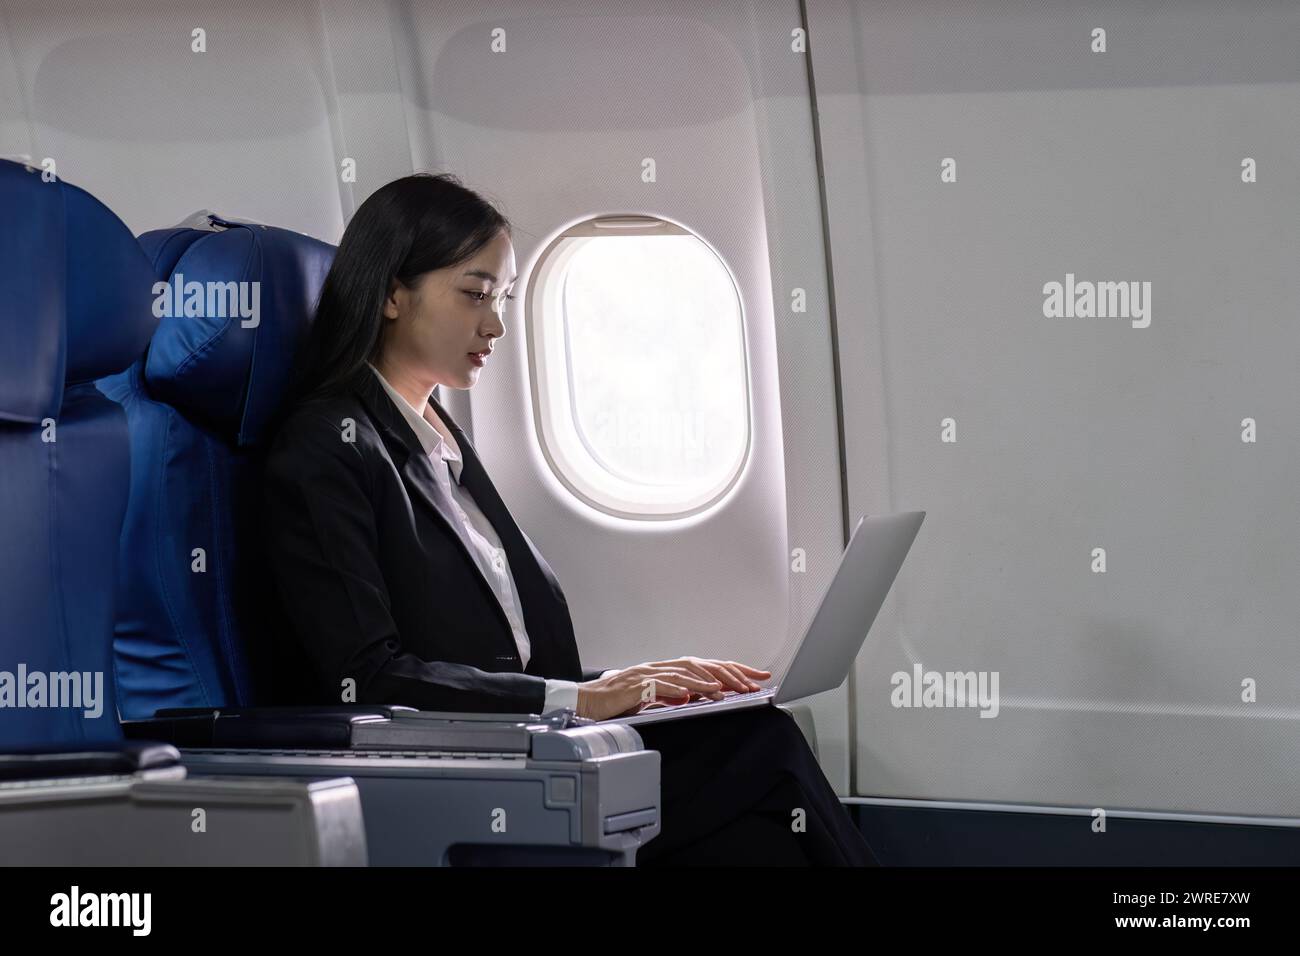 Asian young woman using laptop at first class on airplane during flight, Traveling and Business concept Stock Photo